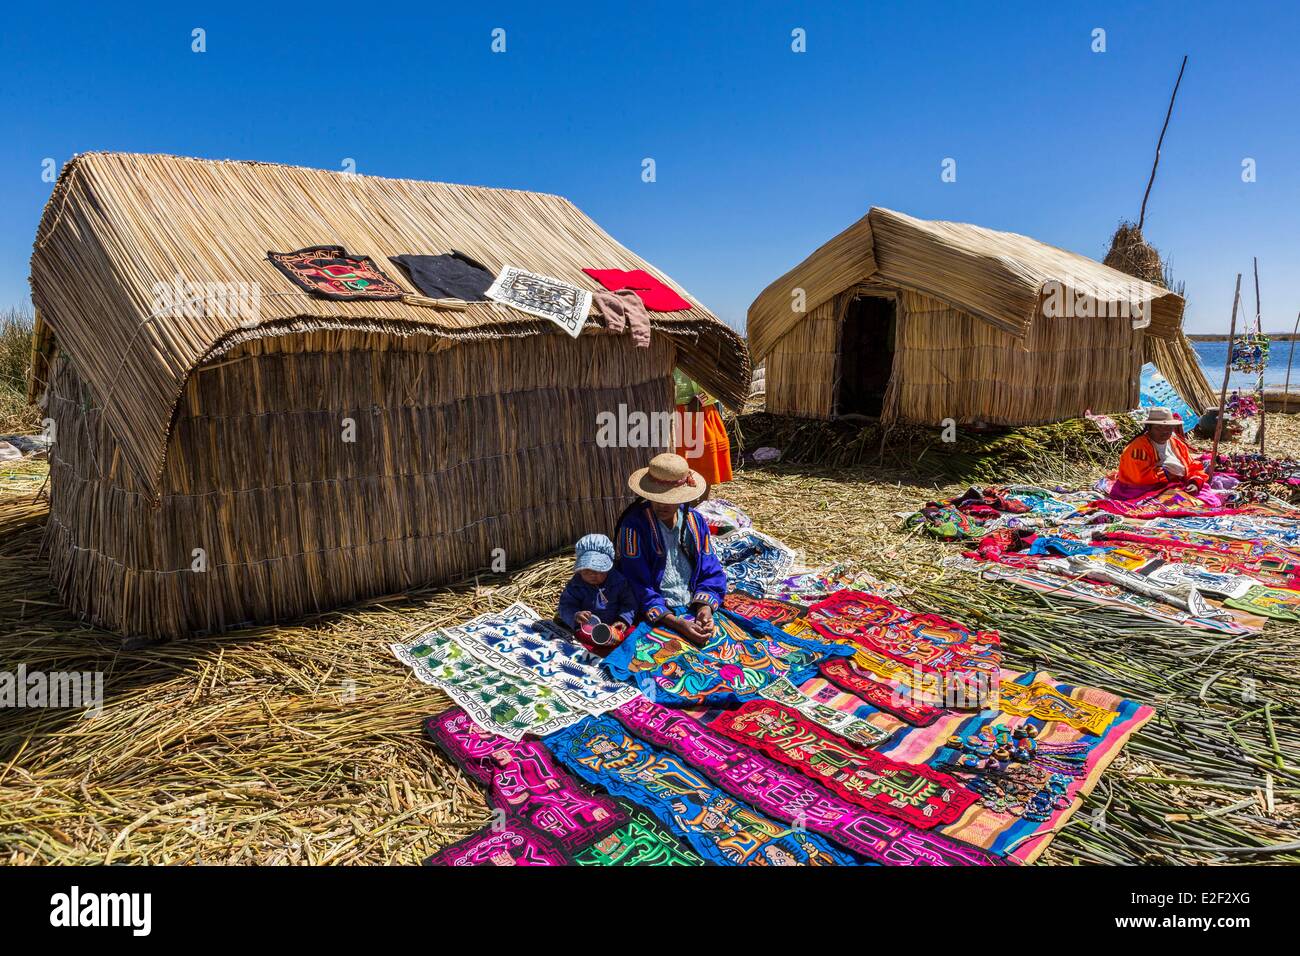 Peru, Puno Province, Lake Titicaca, the descendants of Uros Indians live on floating reed islands and live mainly from tourism Stock Photo